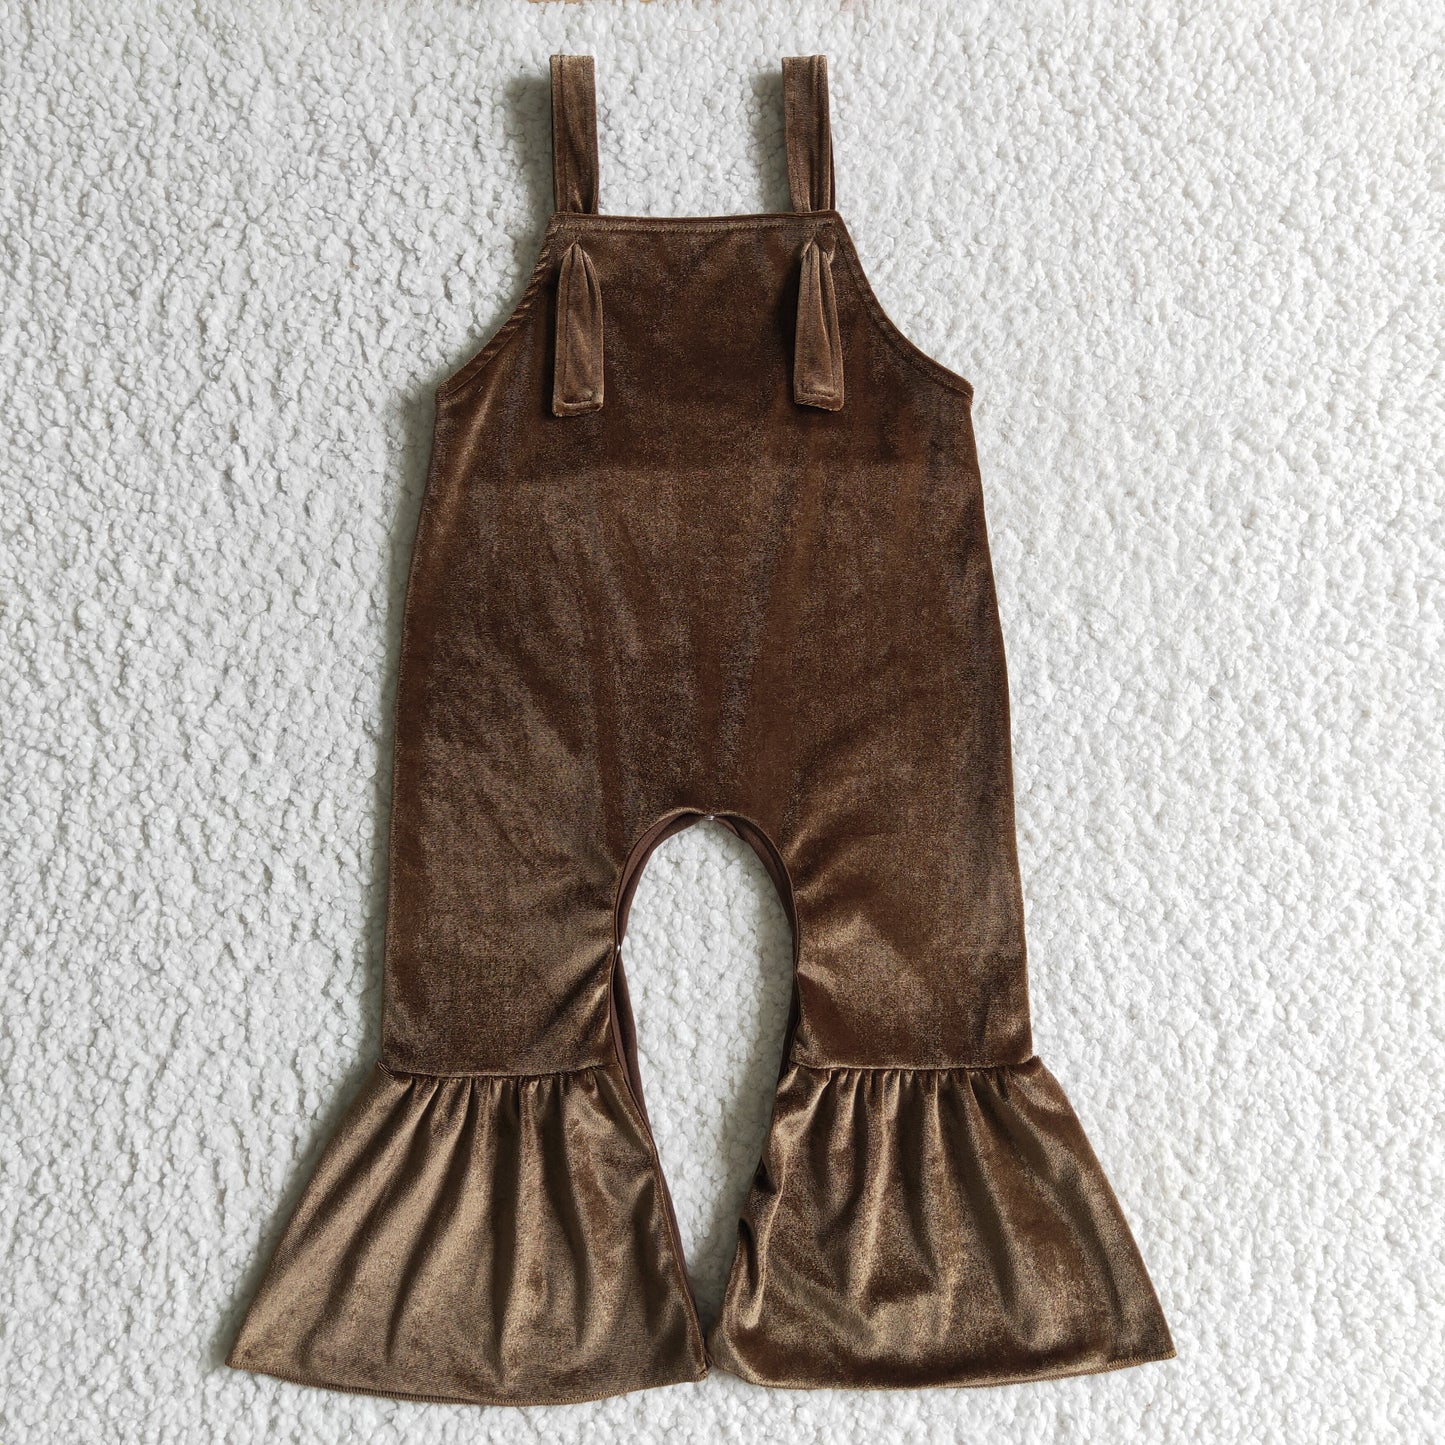 SR0090 hot sale fashion girl suspender brown velvet overalls with covered button